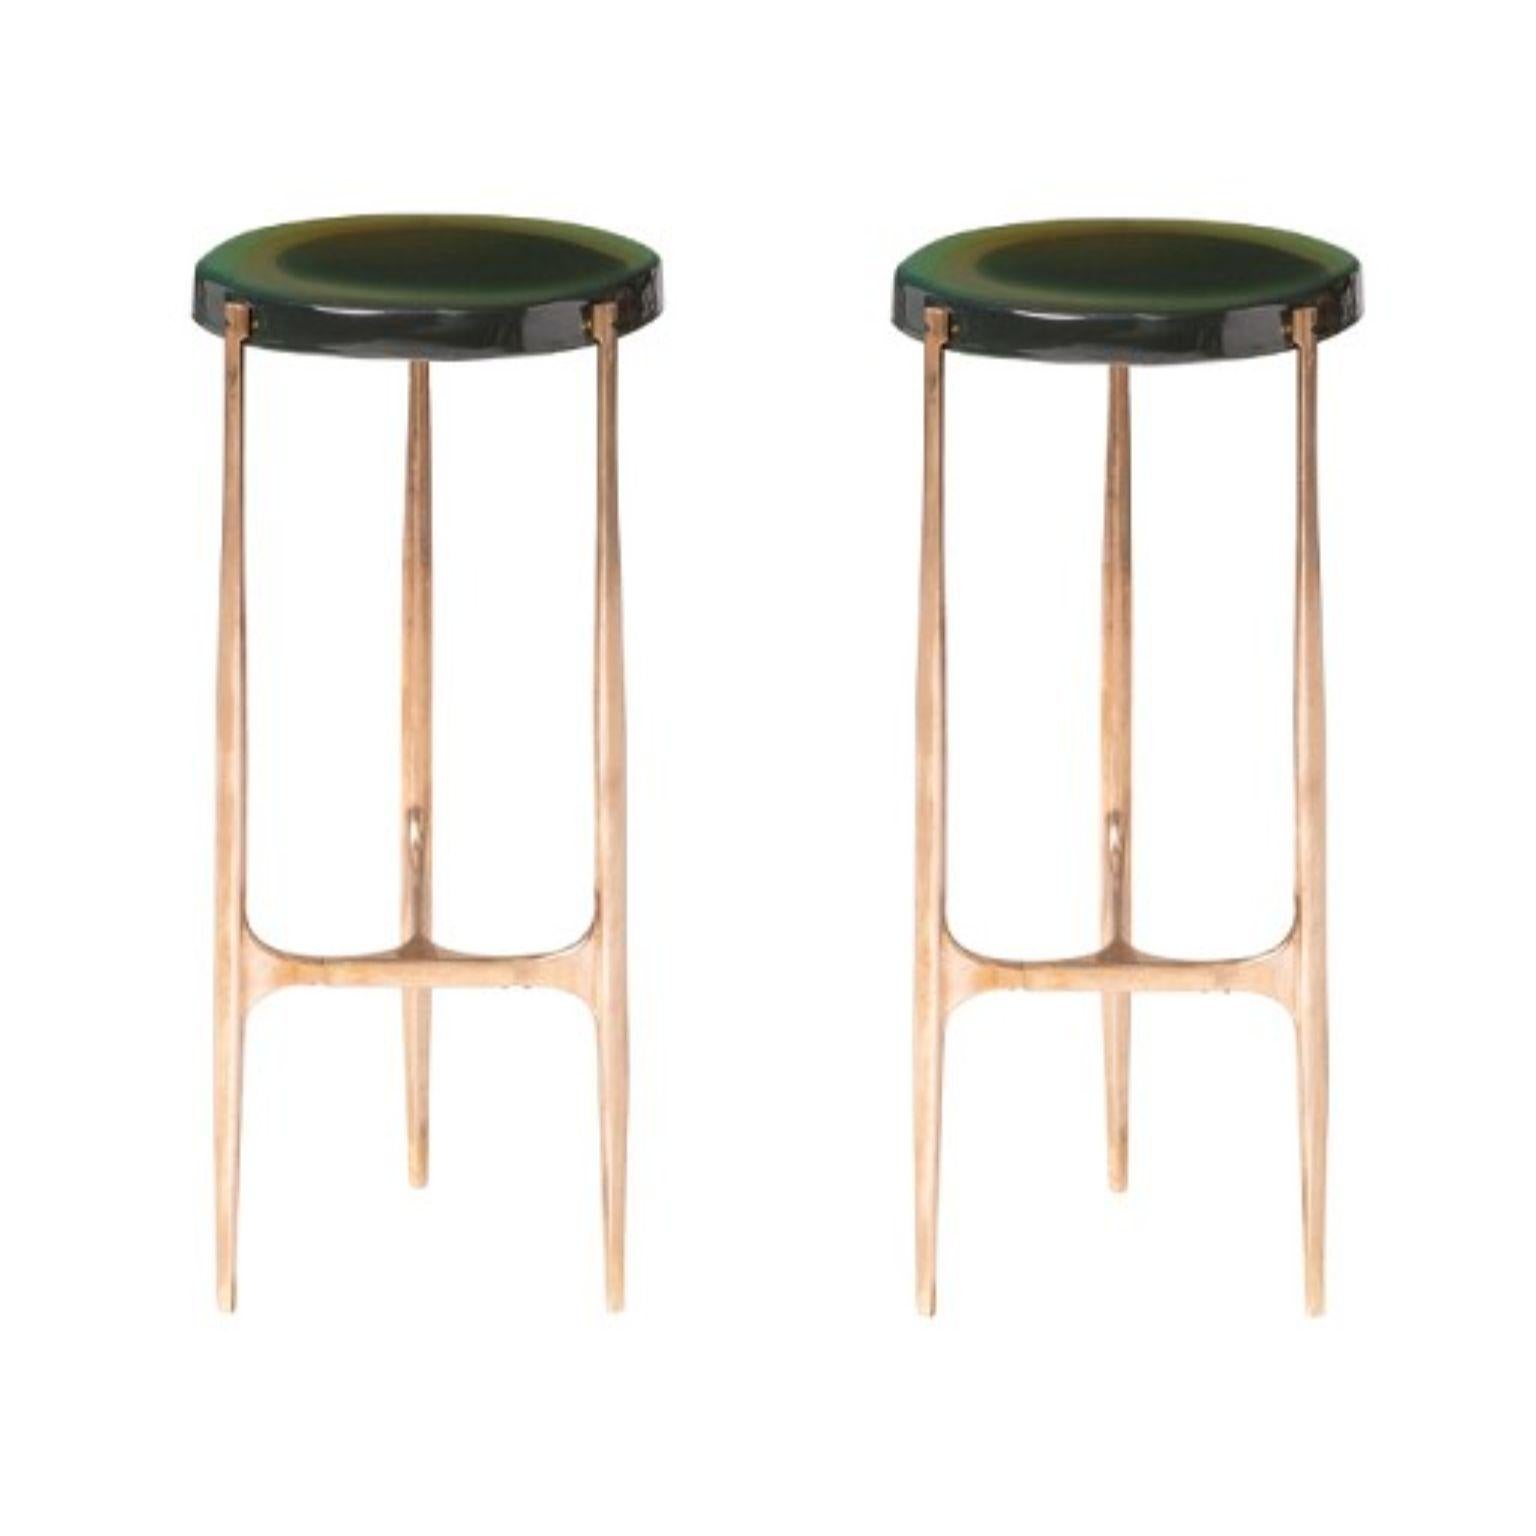 Set of 2 agatha coffee tables by Draga & Aurel.
Dimensions: W 24 x D 24 x H 56.
 top Ø 34 cm.
Materials: resin, bronze.

The Agatha coffee tables are featured by irregular circular tops of transparent and
colorful resin sit on a bronze frame